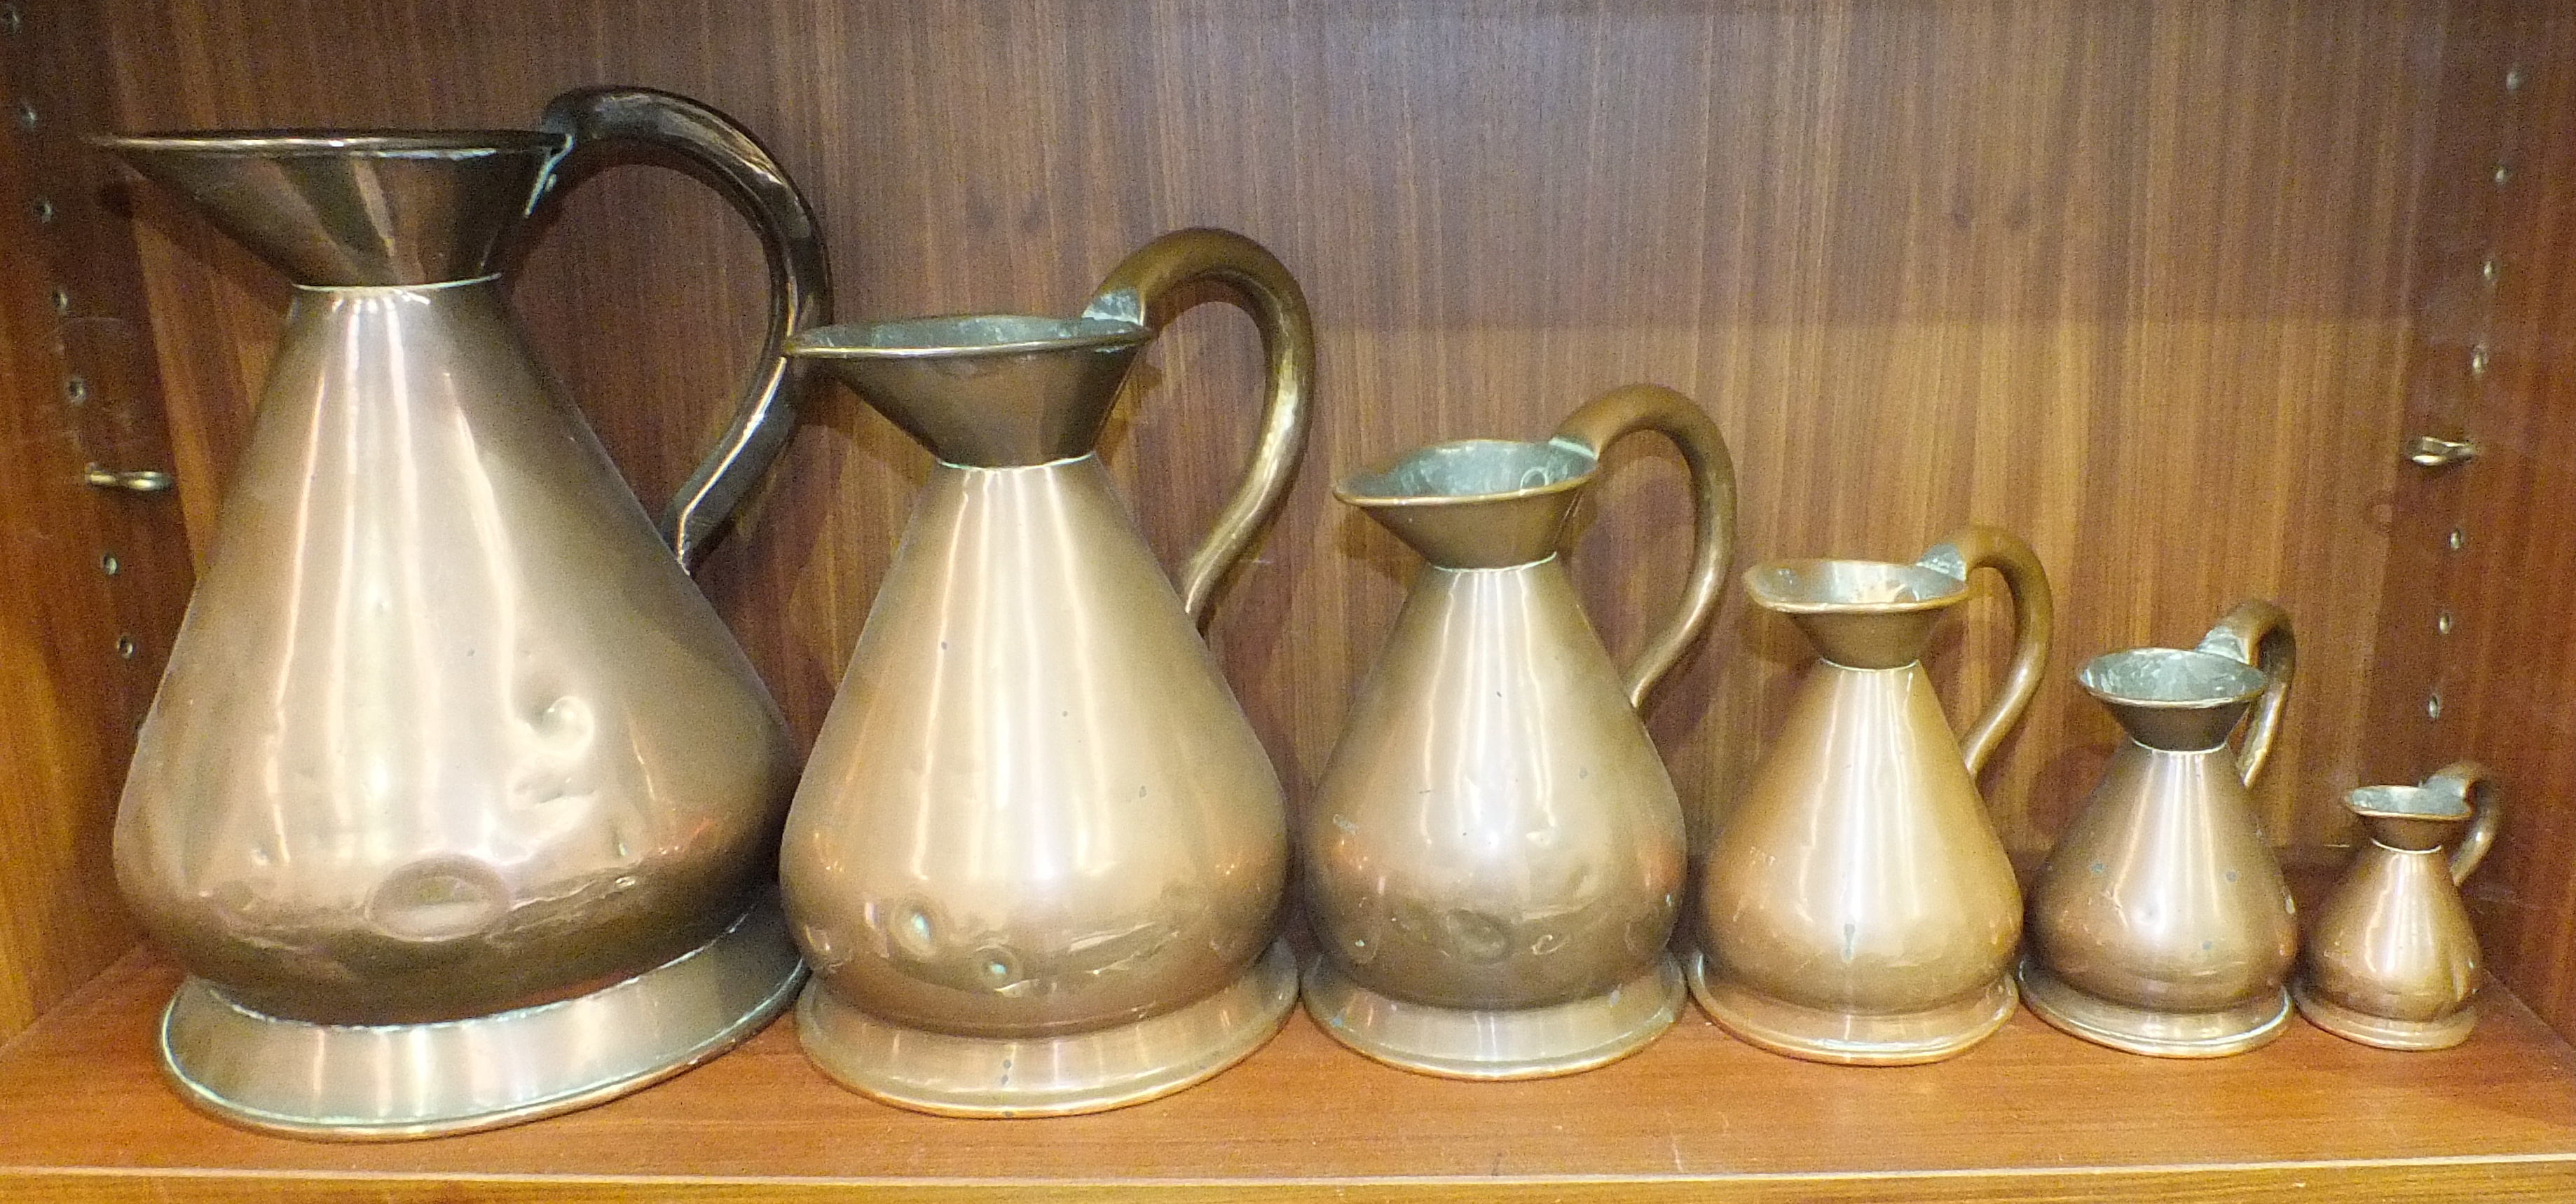 A harlequin set of six graduated copper measures, 1 gallon - ½ gill, the pint measure stamped Burt